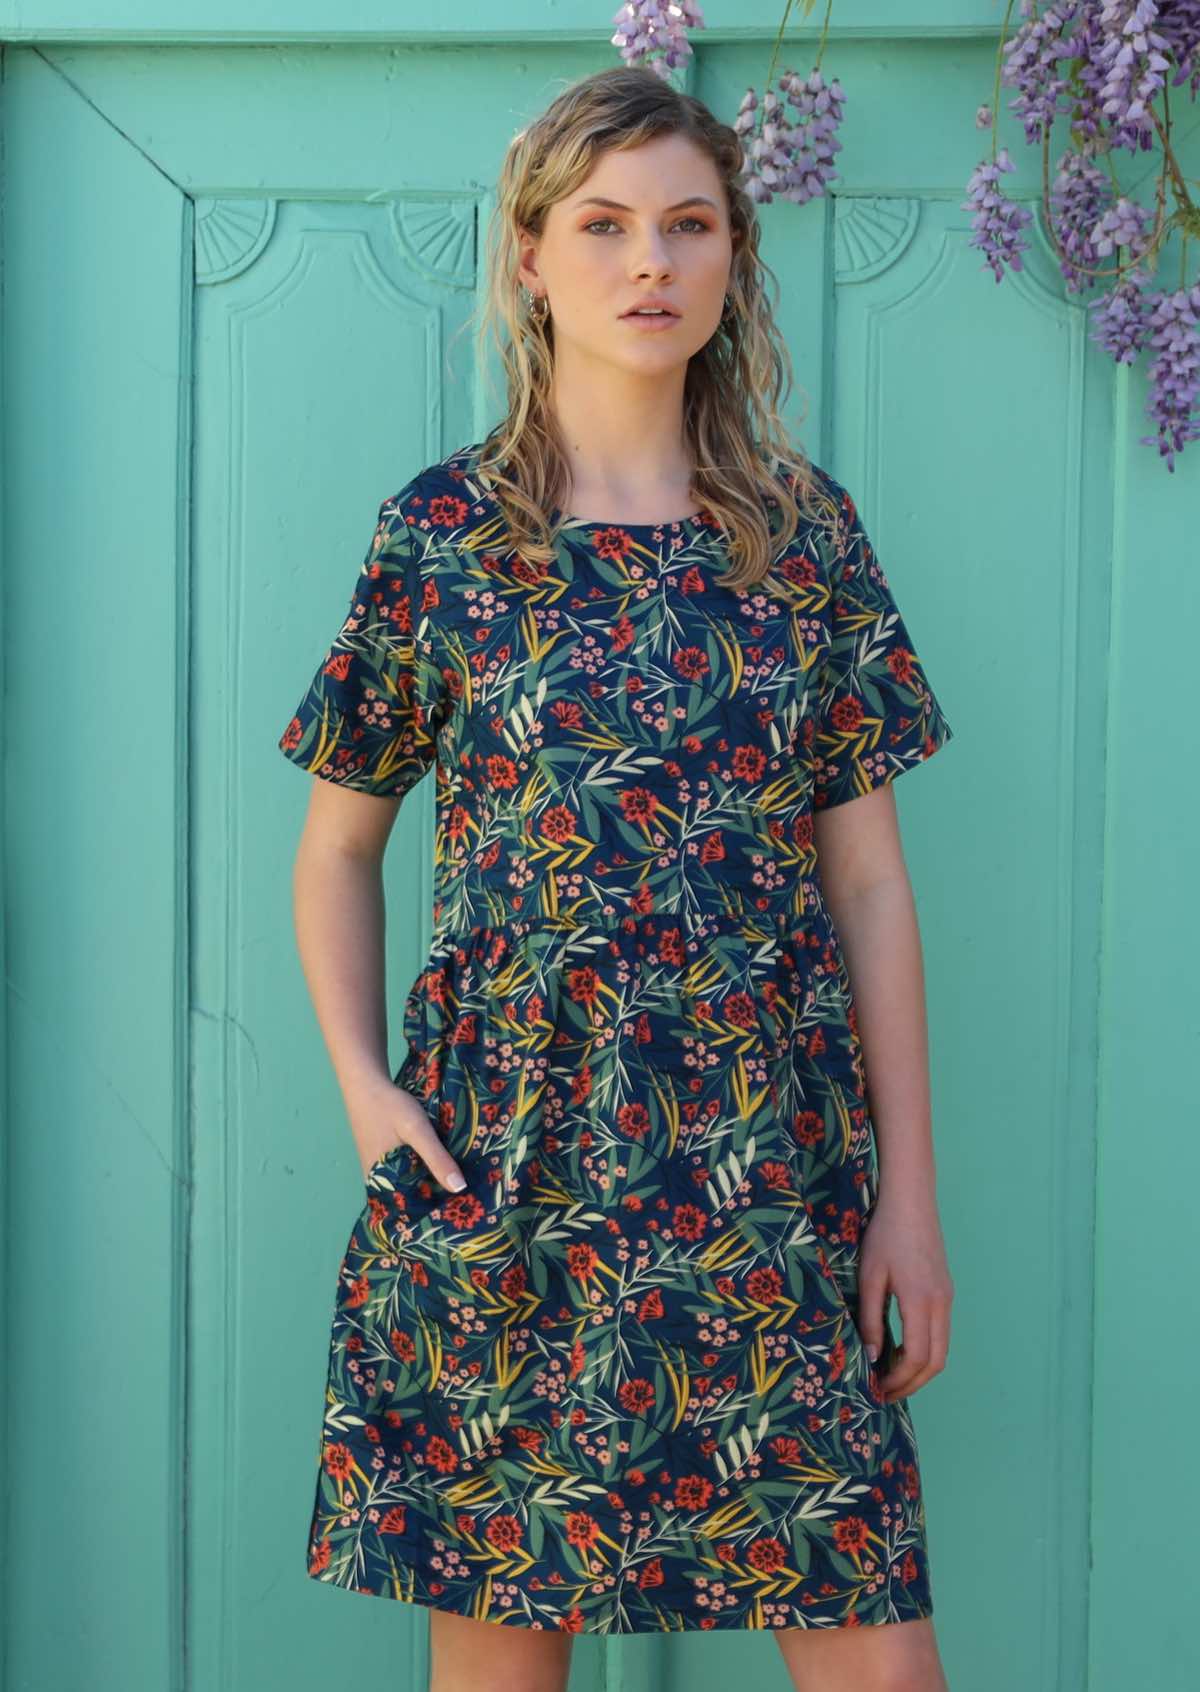 Model stands with her hand in the pocket of her floral dress. 